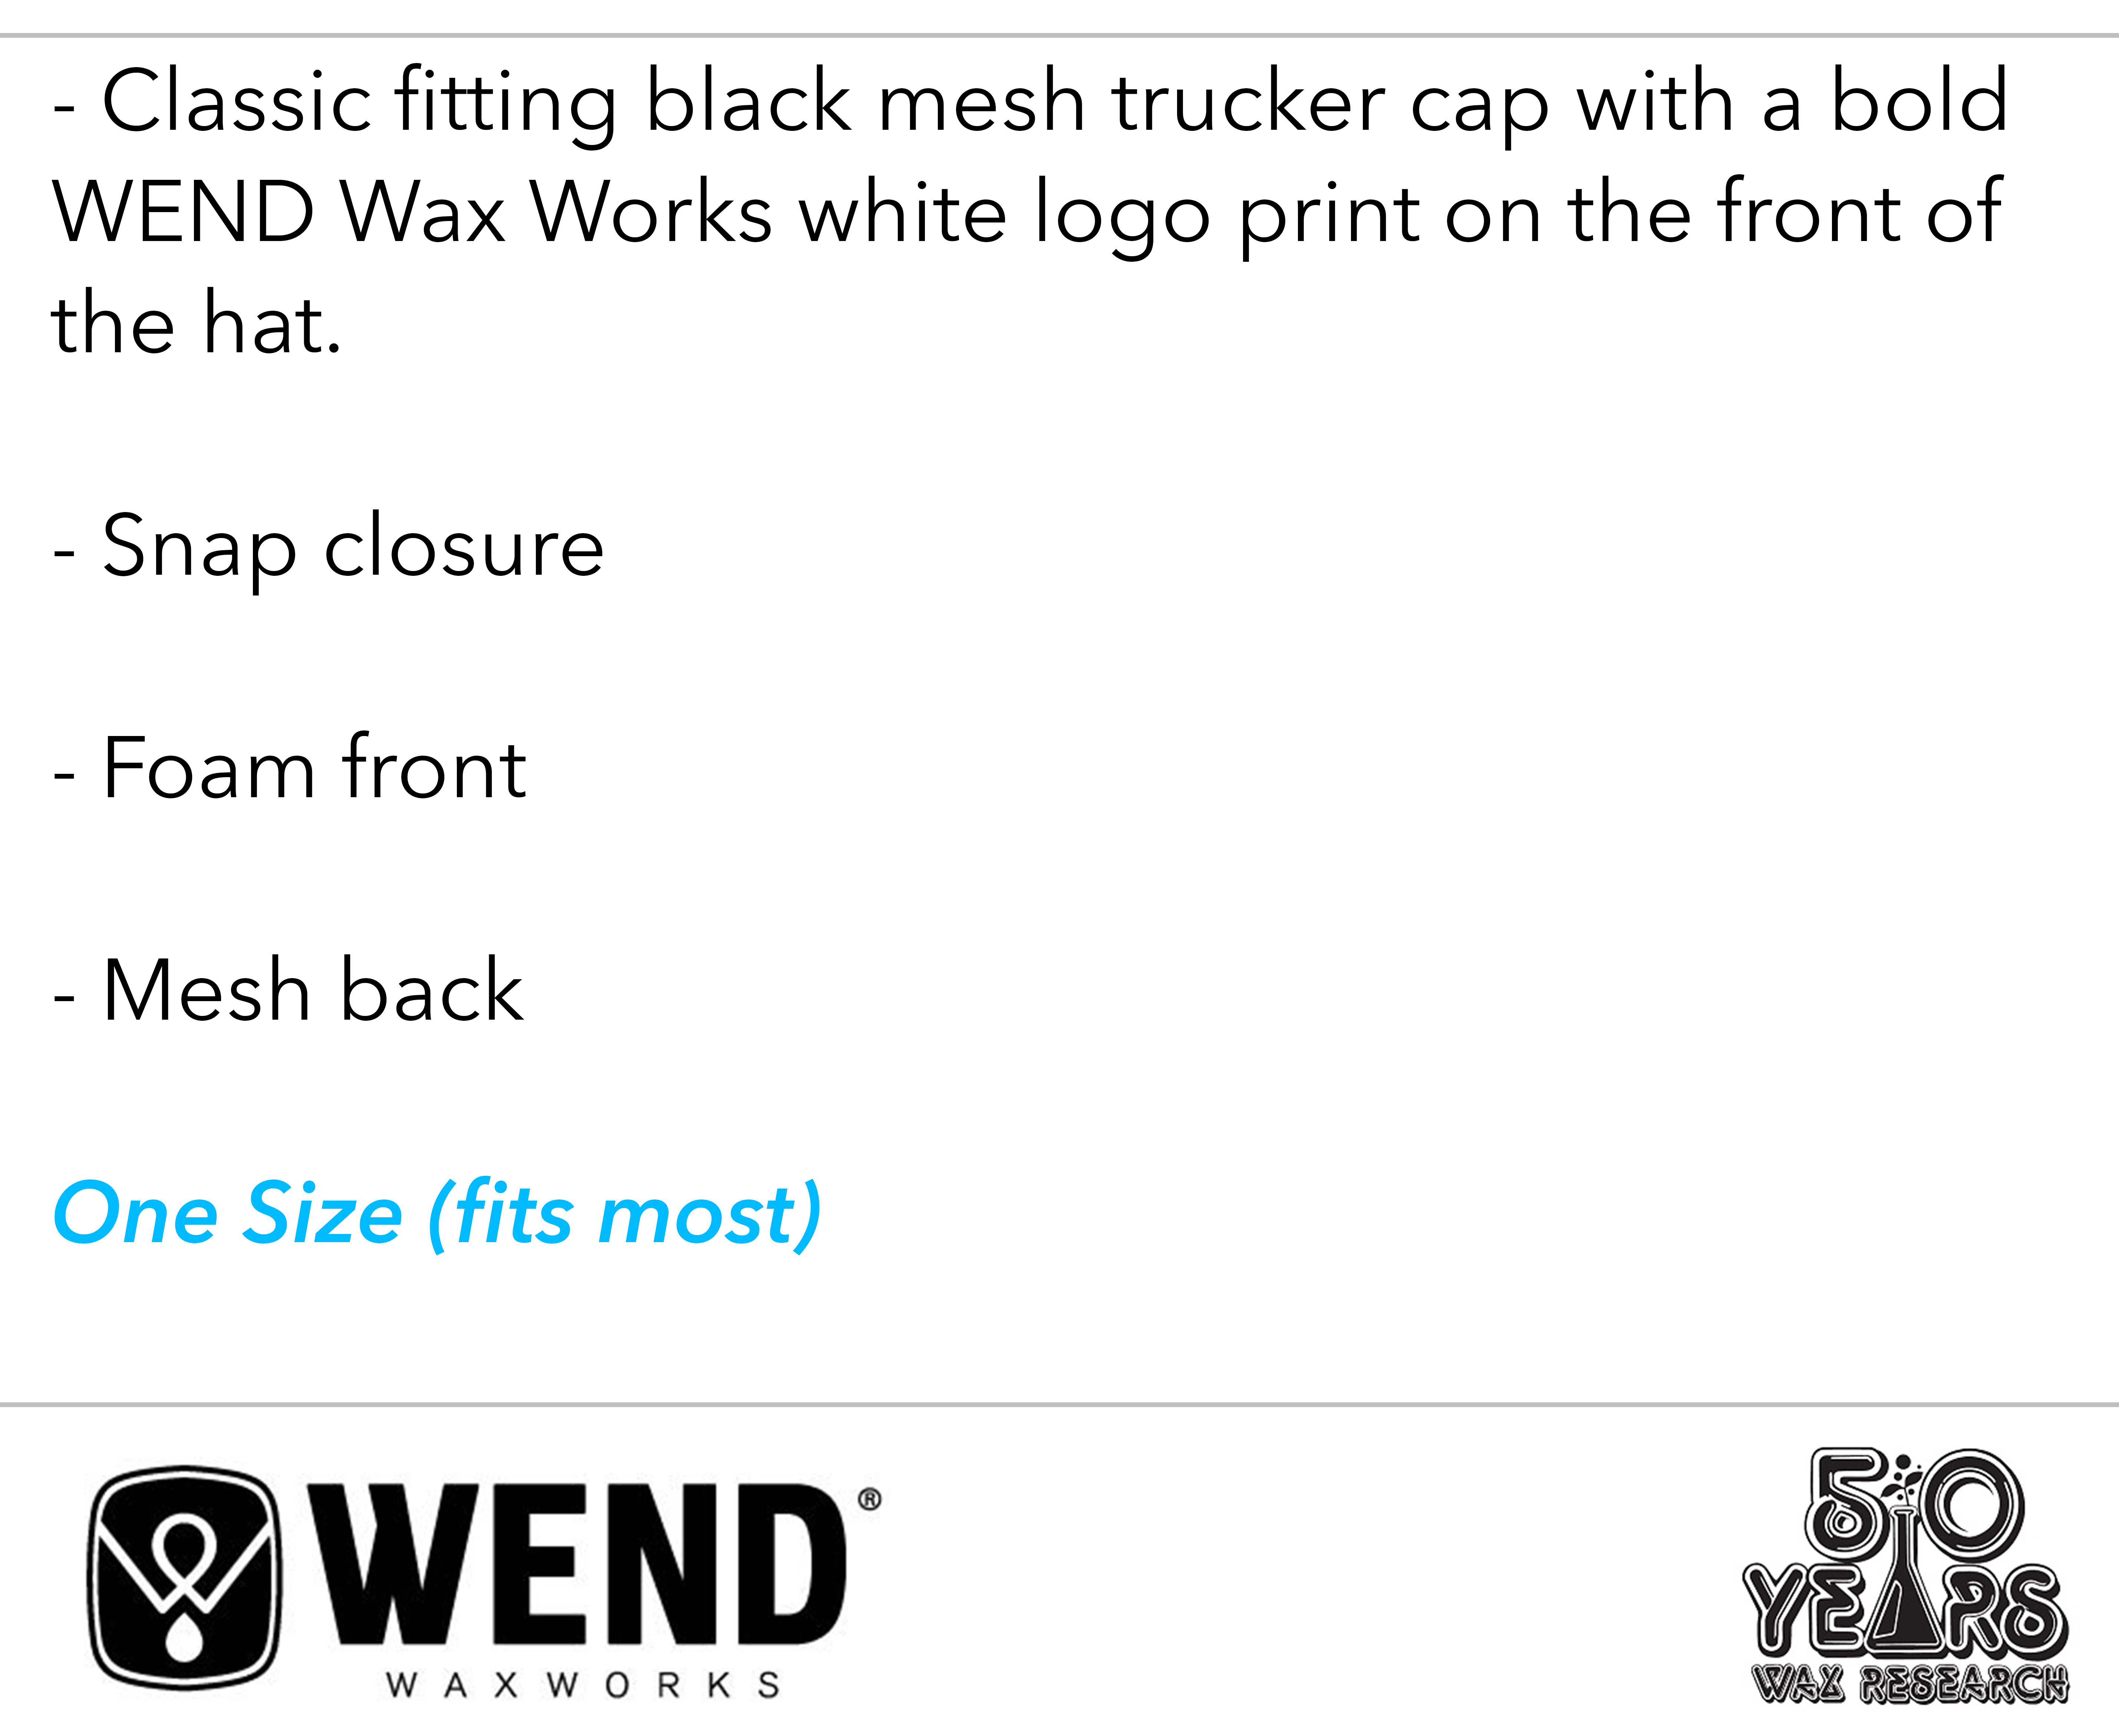 Classic fitting black mesh trucker cap with a bold WEND Wax Works white logo print on the front of the hat. Snap closure, foam front, mesh back. One size fits most. 